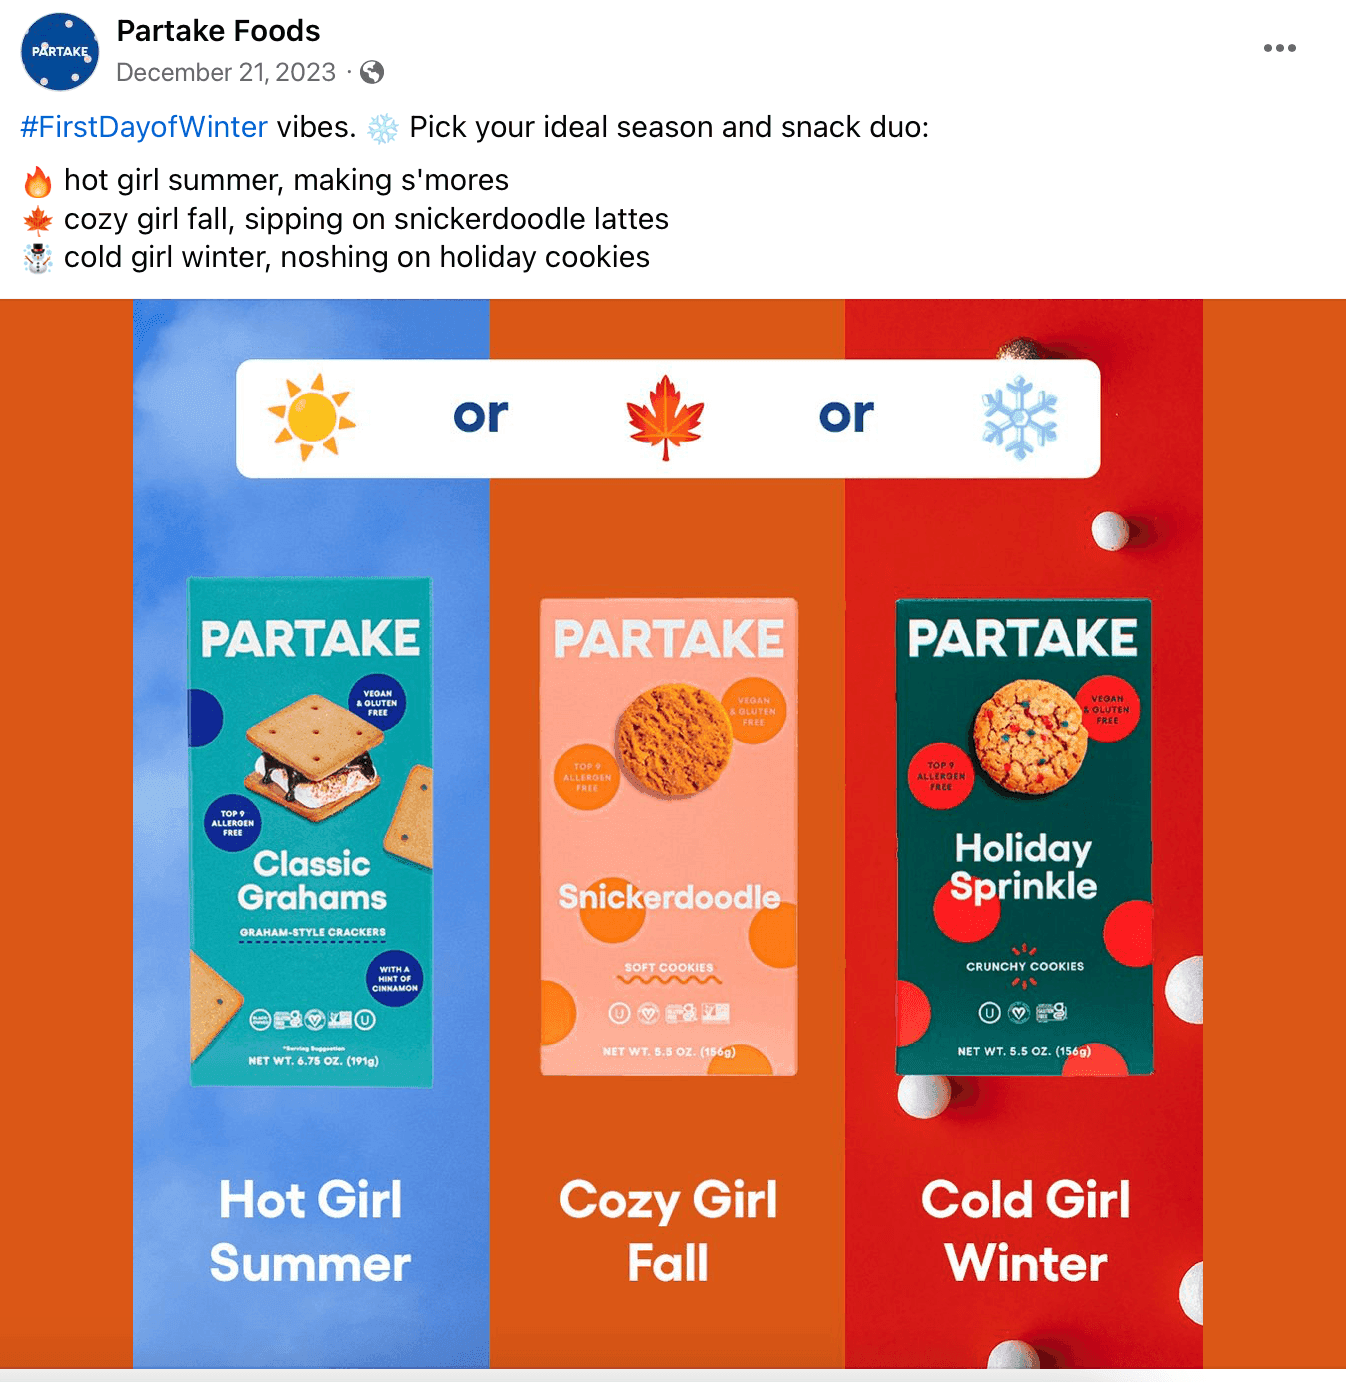 Partake Foods Facebook poll about which season/snack combo is best